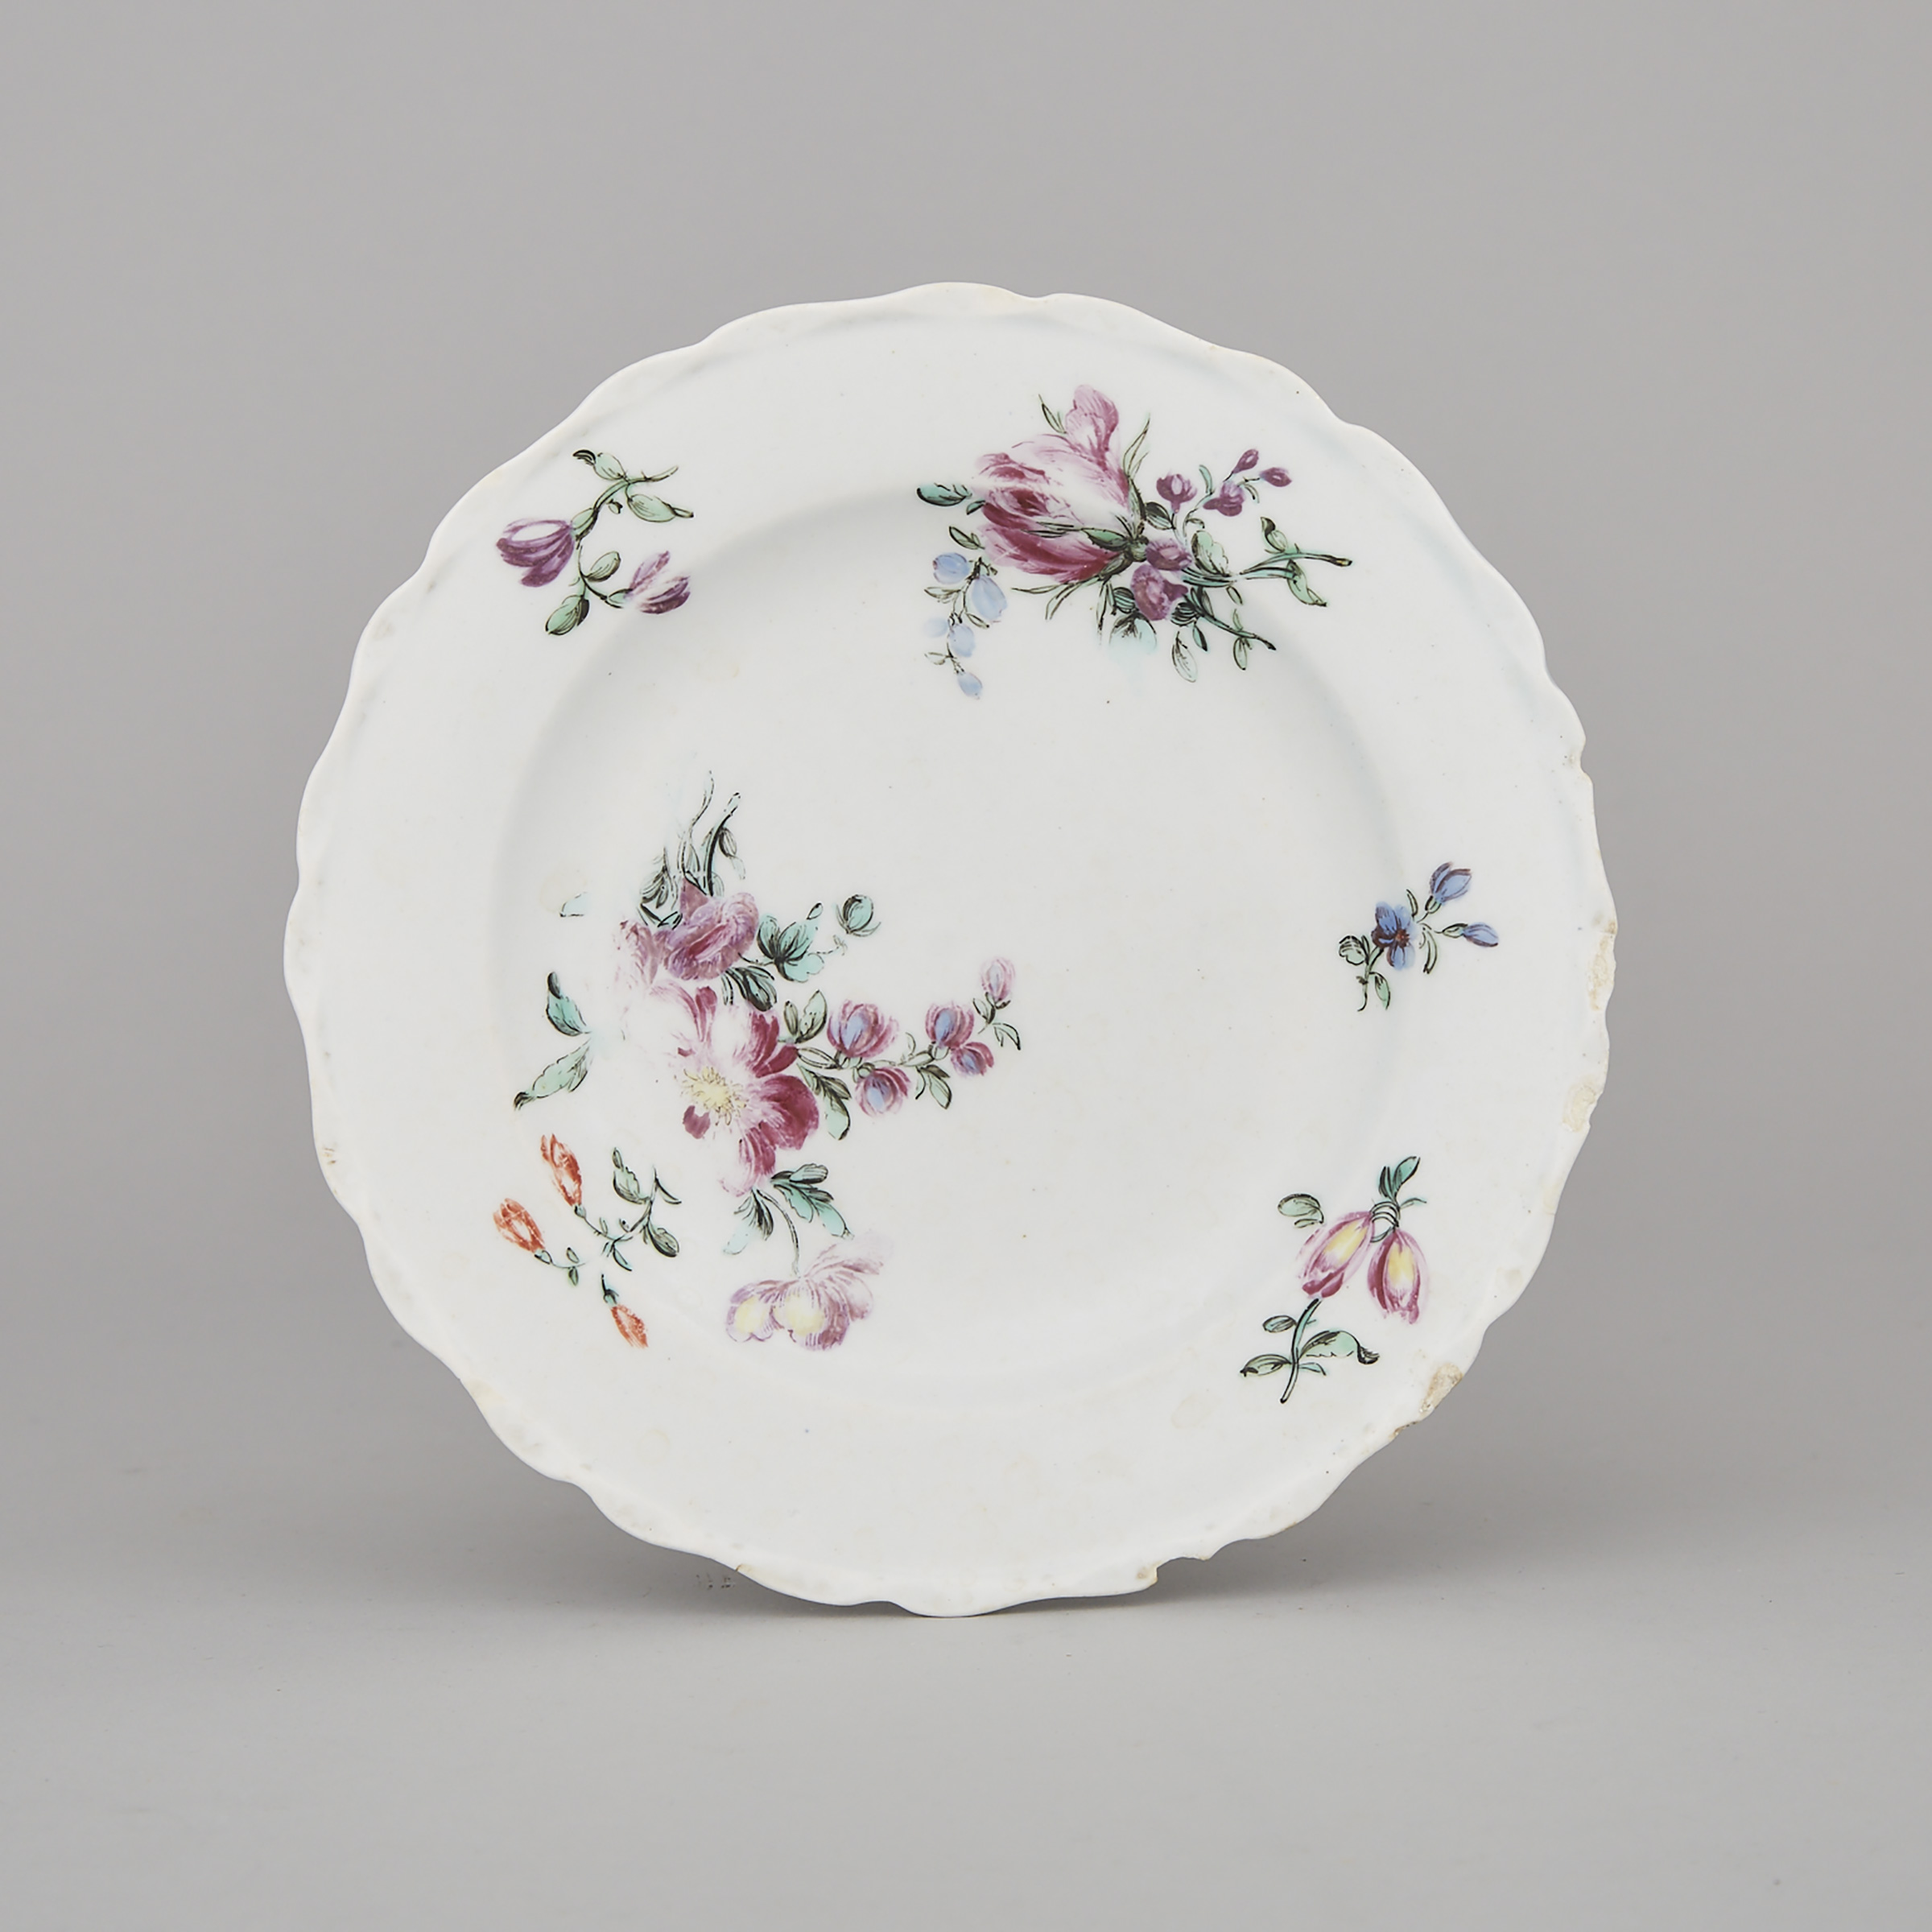 Bow Polychrome Decorated Small Plate, c.1765